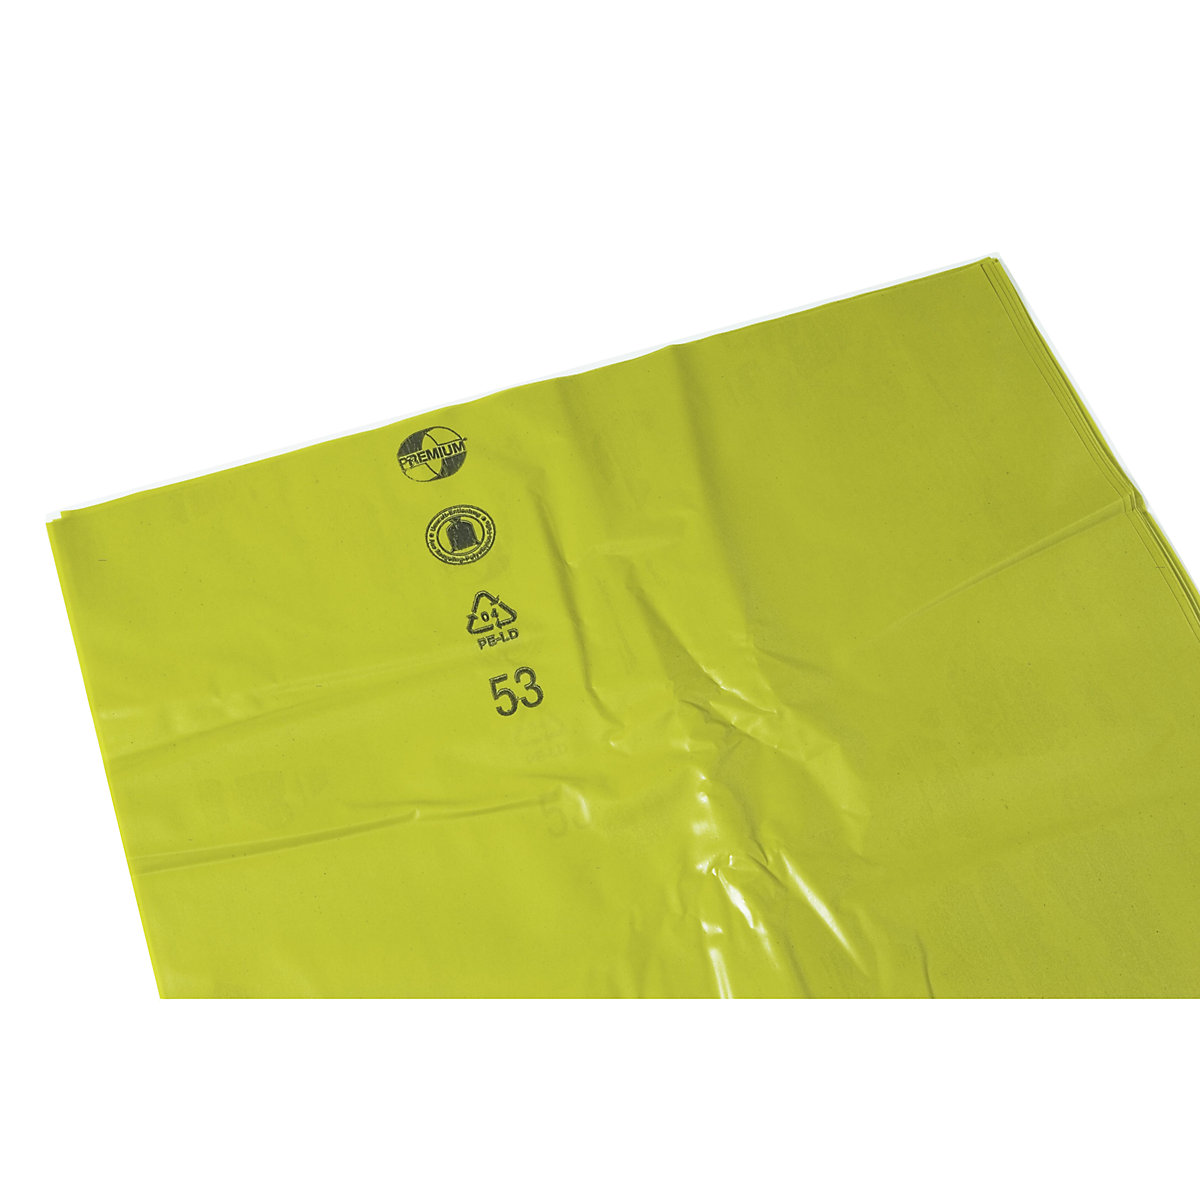 PREMIUM large capacity waste sacks, LDPE, 120 l, LxWxH 700 x 250 x 1200 mm, 50 µm, yellow, pack of 200-4